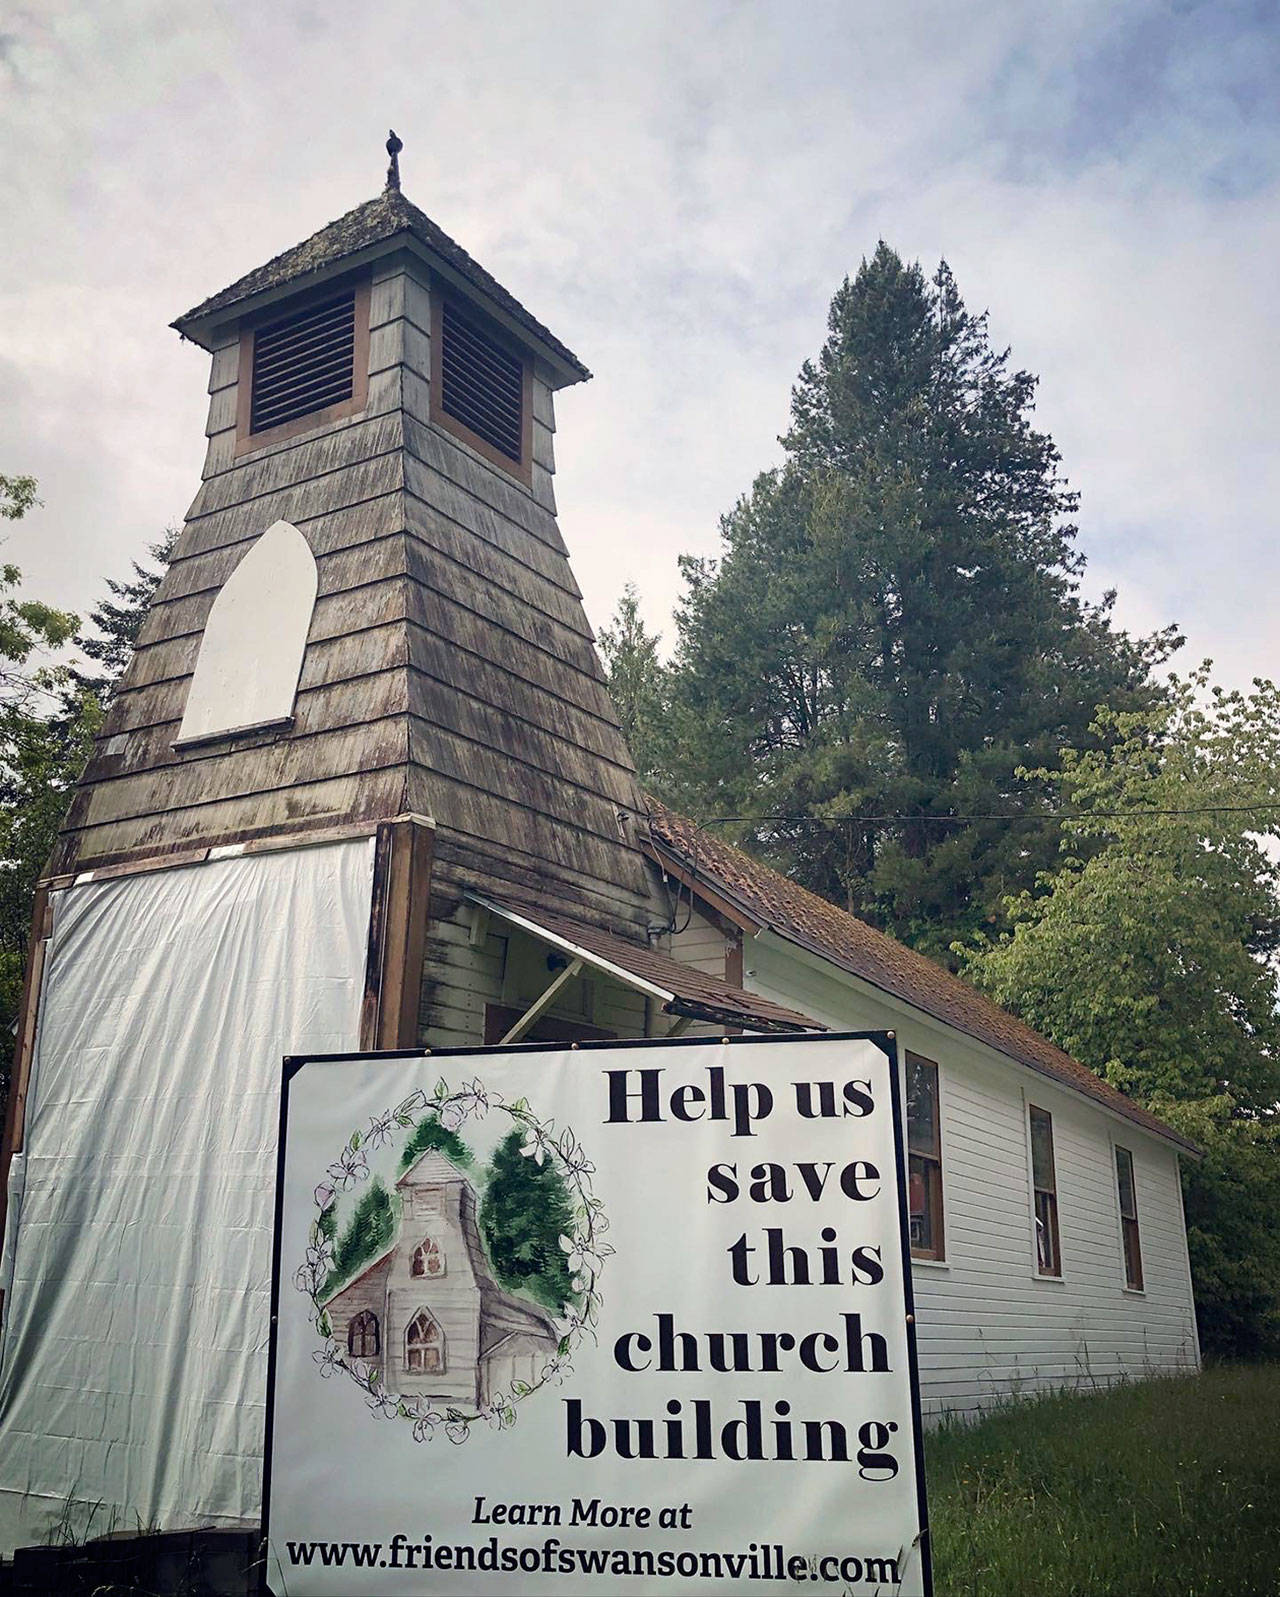 Friends of Swansonville have been working for one year to restore this 115-year-old church. (Jessie Michaels)